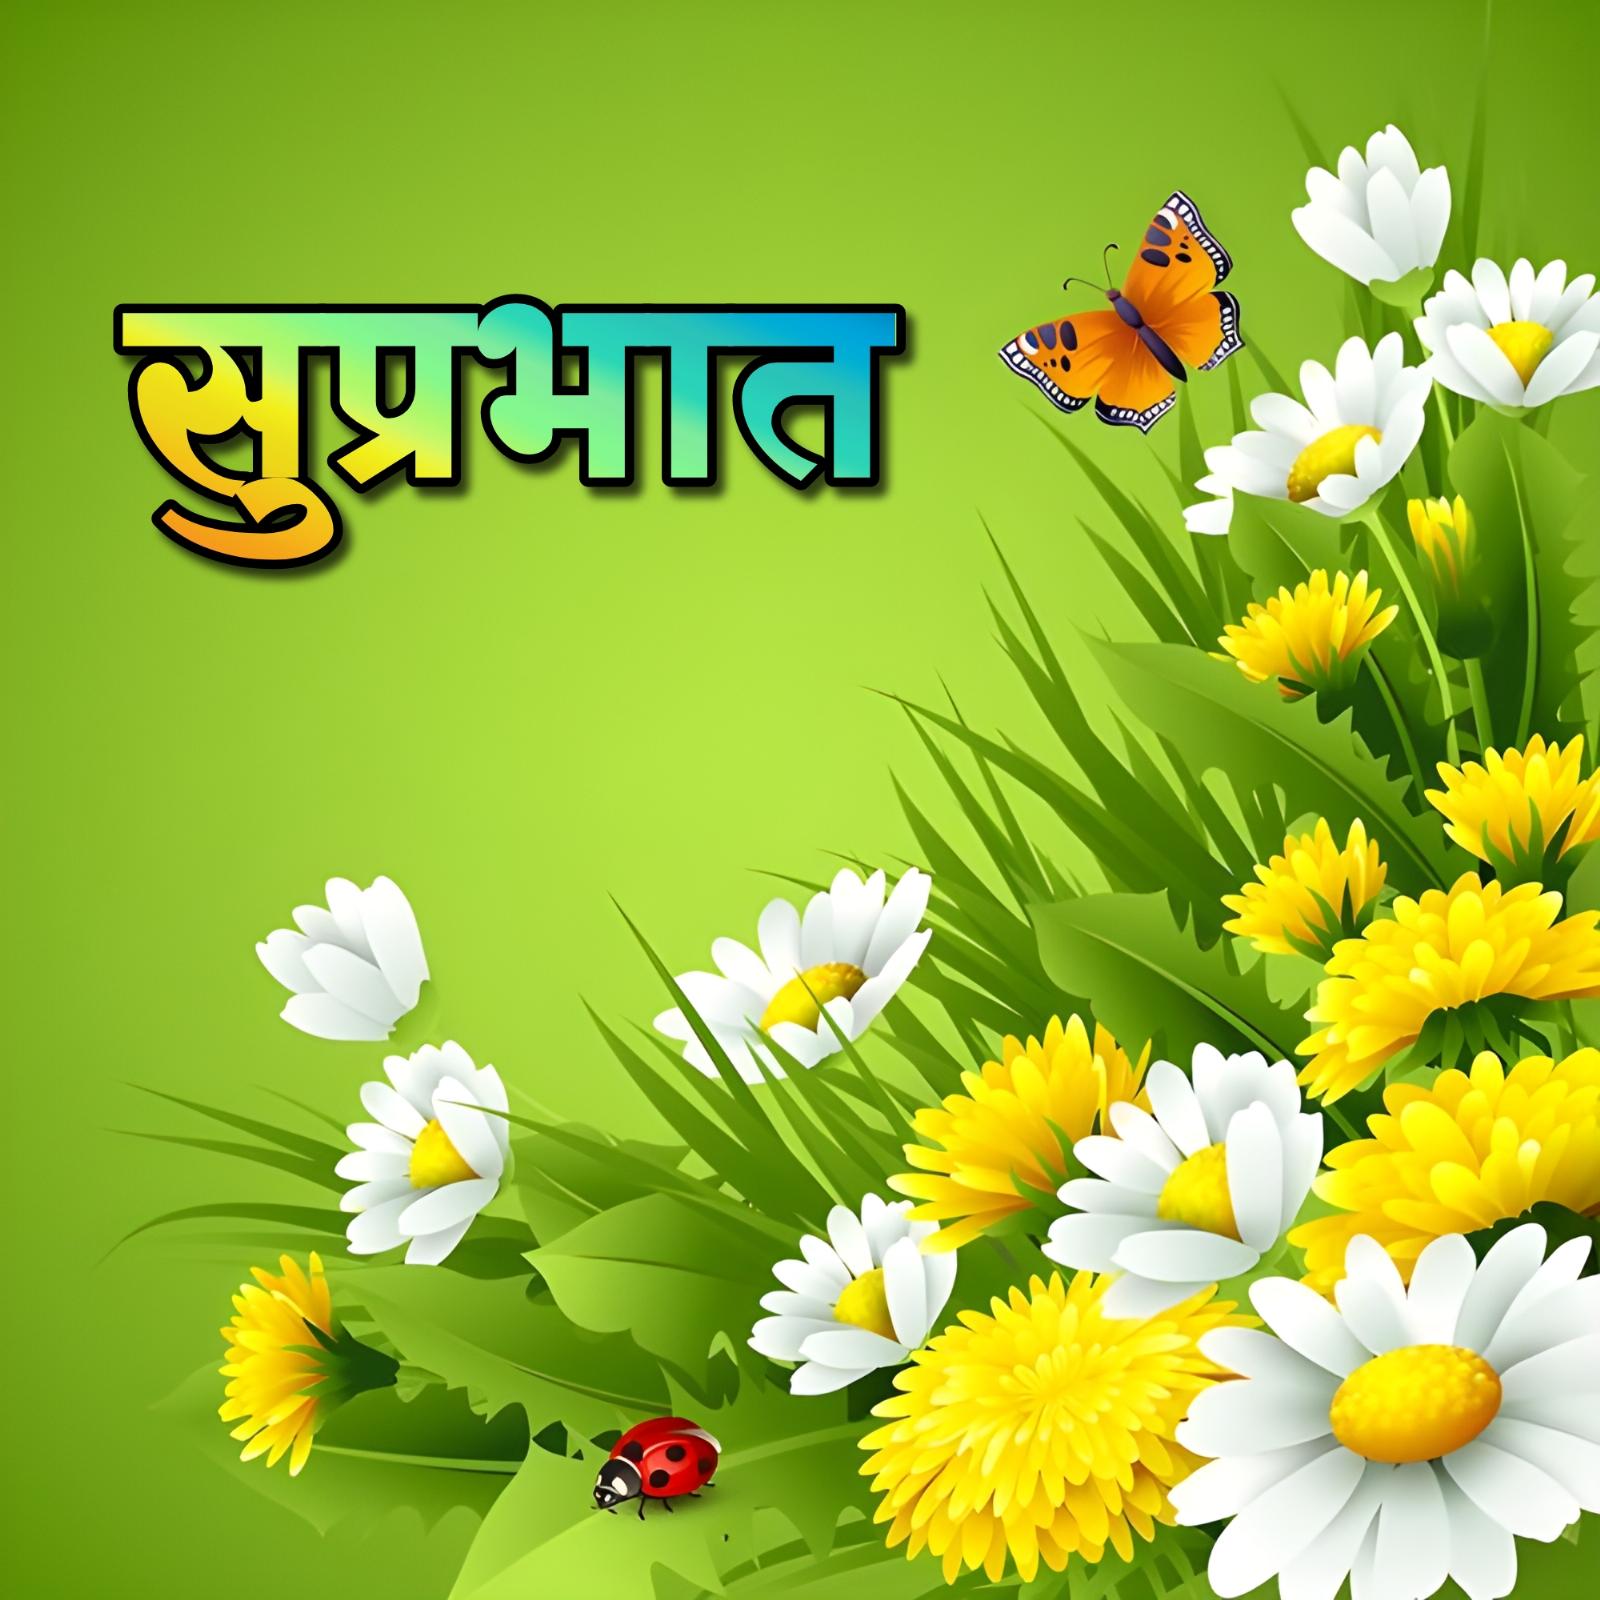 Suprabhat With Flower And Butterfly